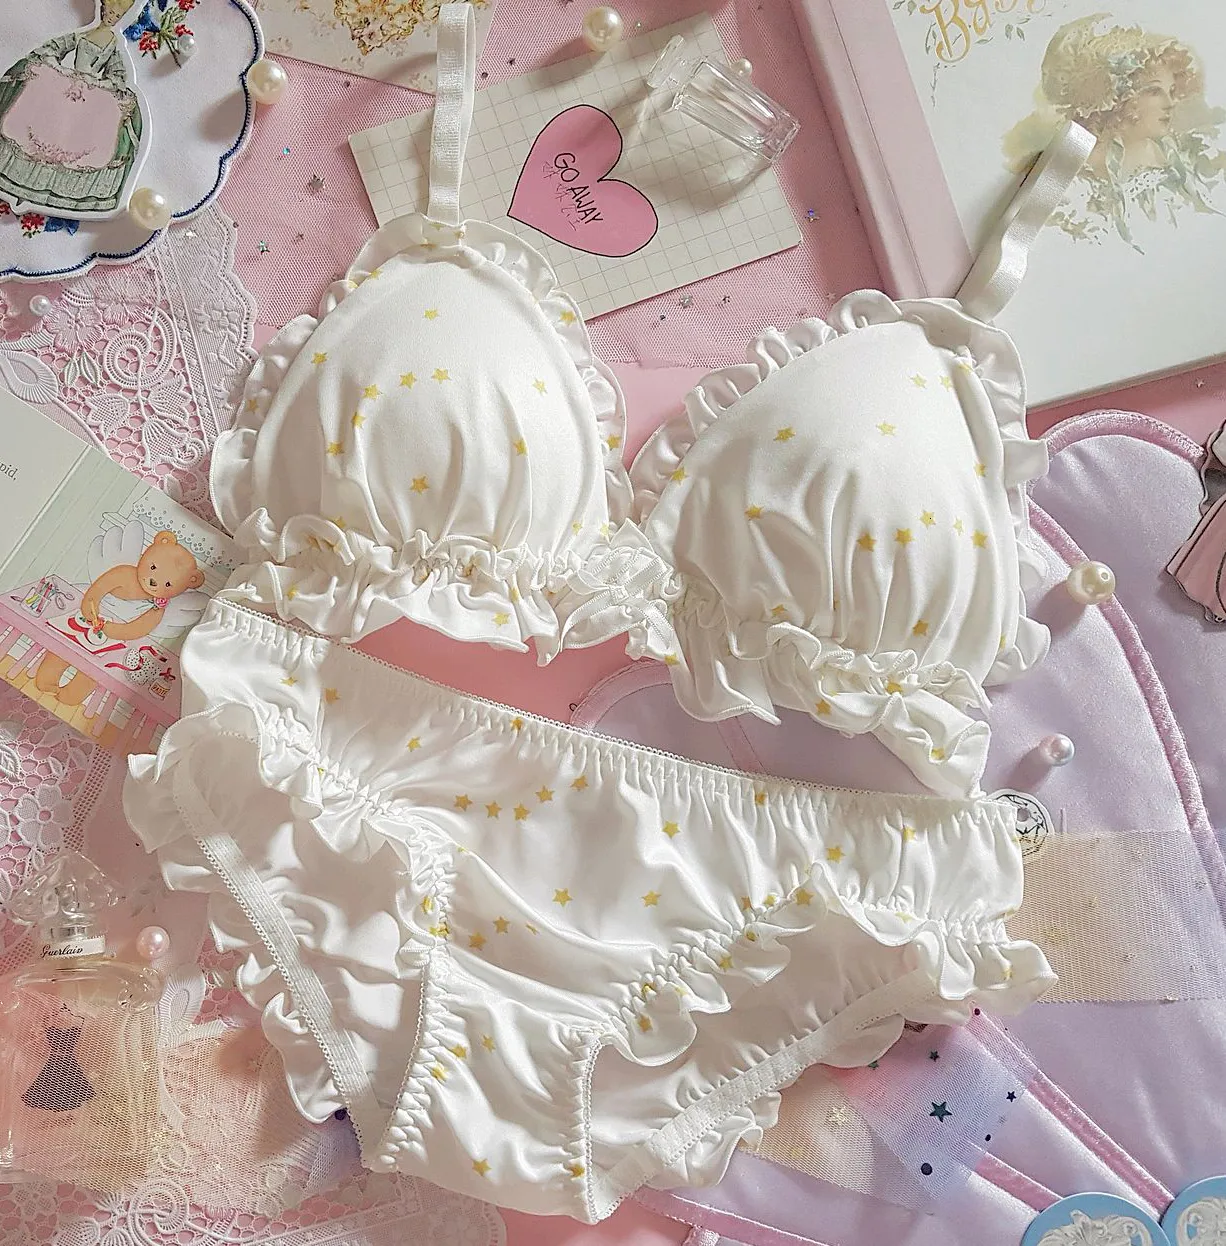 Lolita Girls Lace Bra And Panties Set Back Cute And Comfortable Sleep  Intimates With Sweet Kawaii Lingerie 230427 From Kong00, $15.36